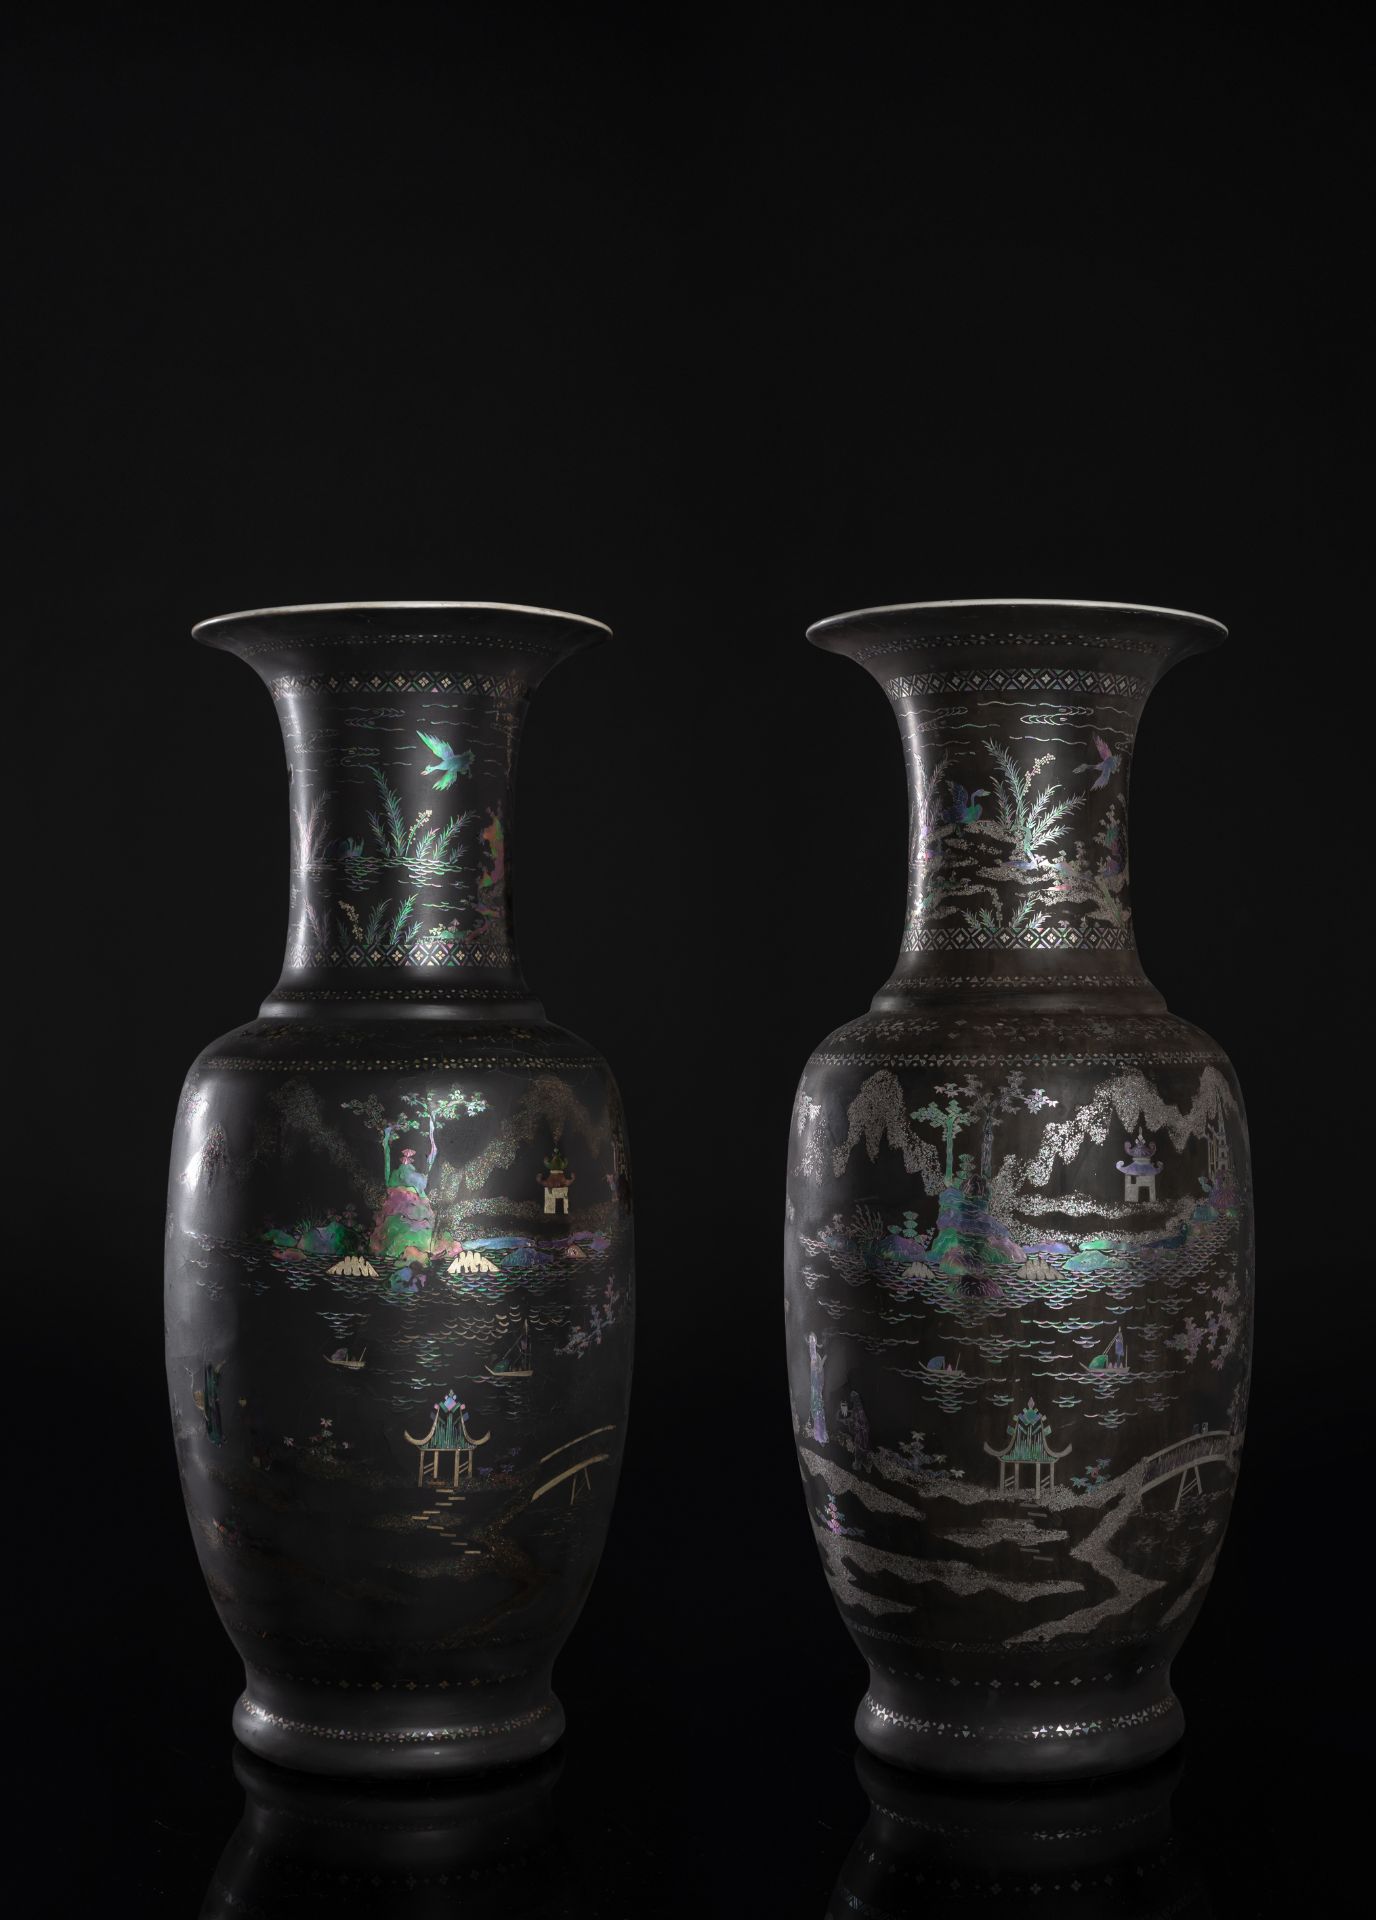 A VERY RARE AND LARGE PAIR OF LAC-BURGAUTÉ PORCELAIN VASES AND COVERS - Image 3 of 7